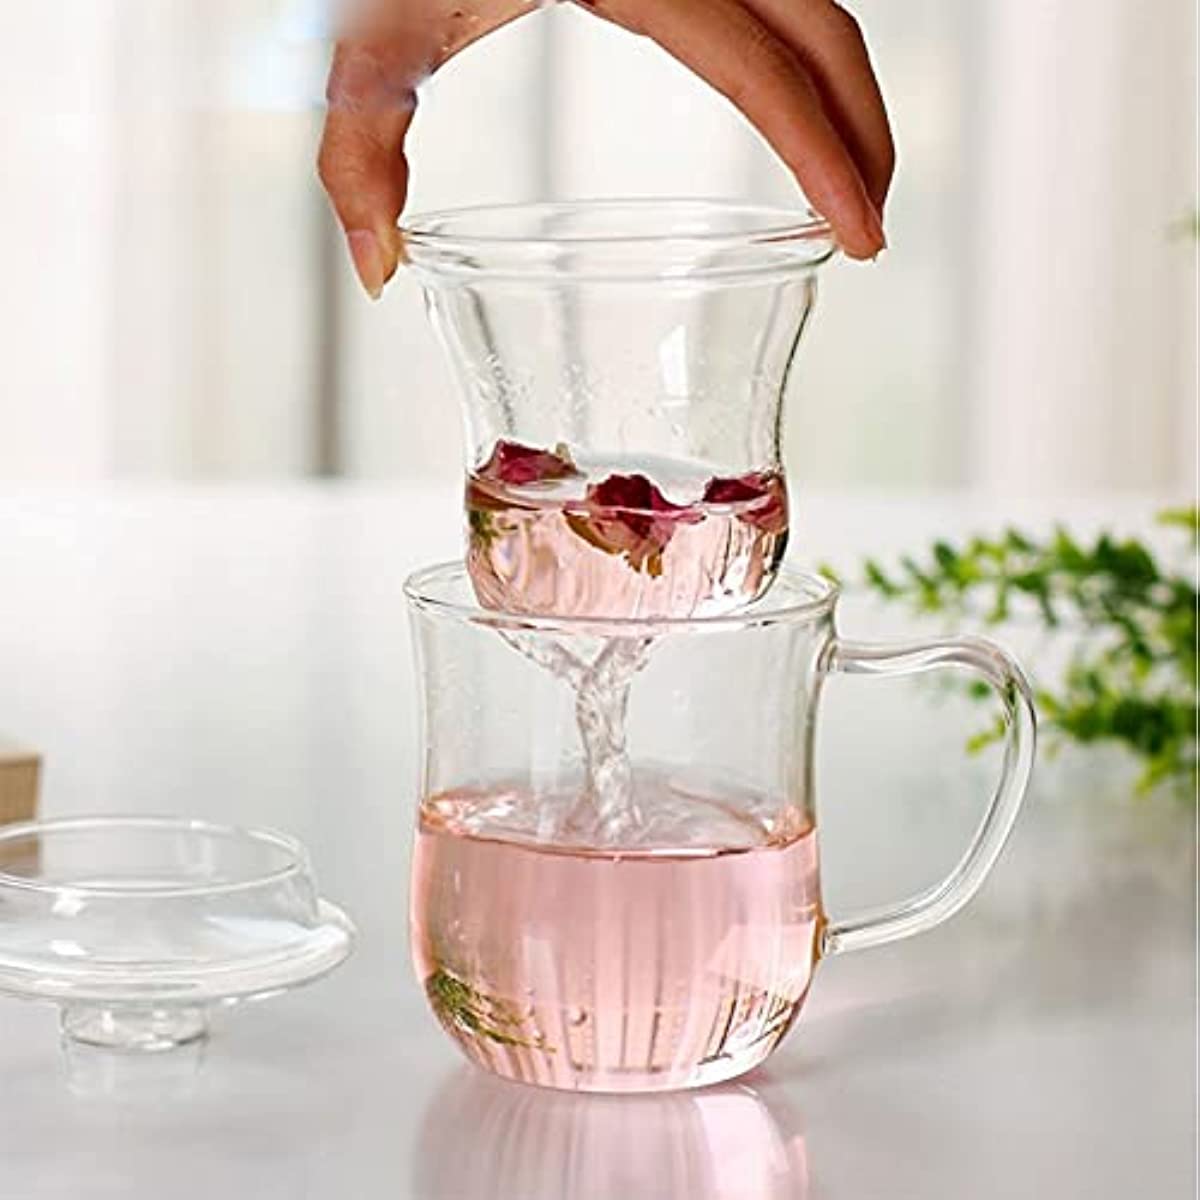 400ml Thickened Glass Tea Mug with Lid and Infuser, Transparent Heat-resistant High Borosilicate Glass Flower Tea Cup Office Milk Cups Coffee Mugs (400ml)